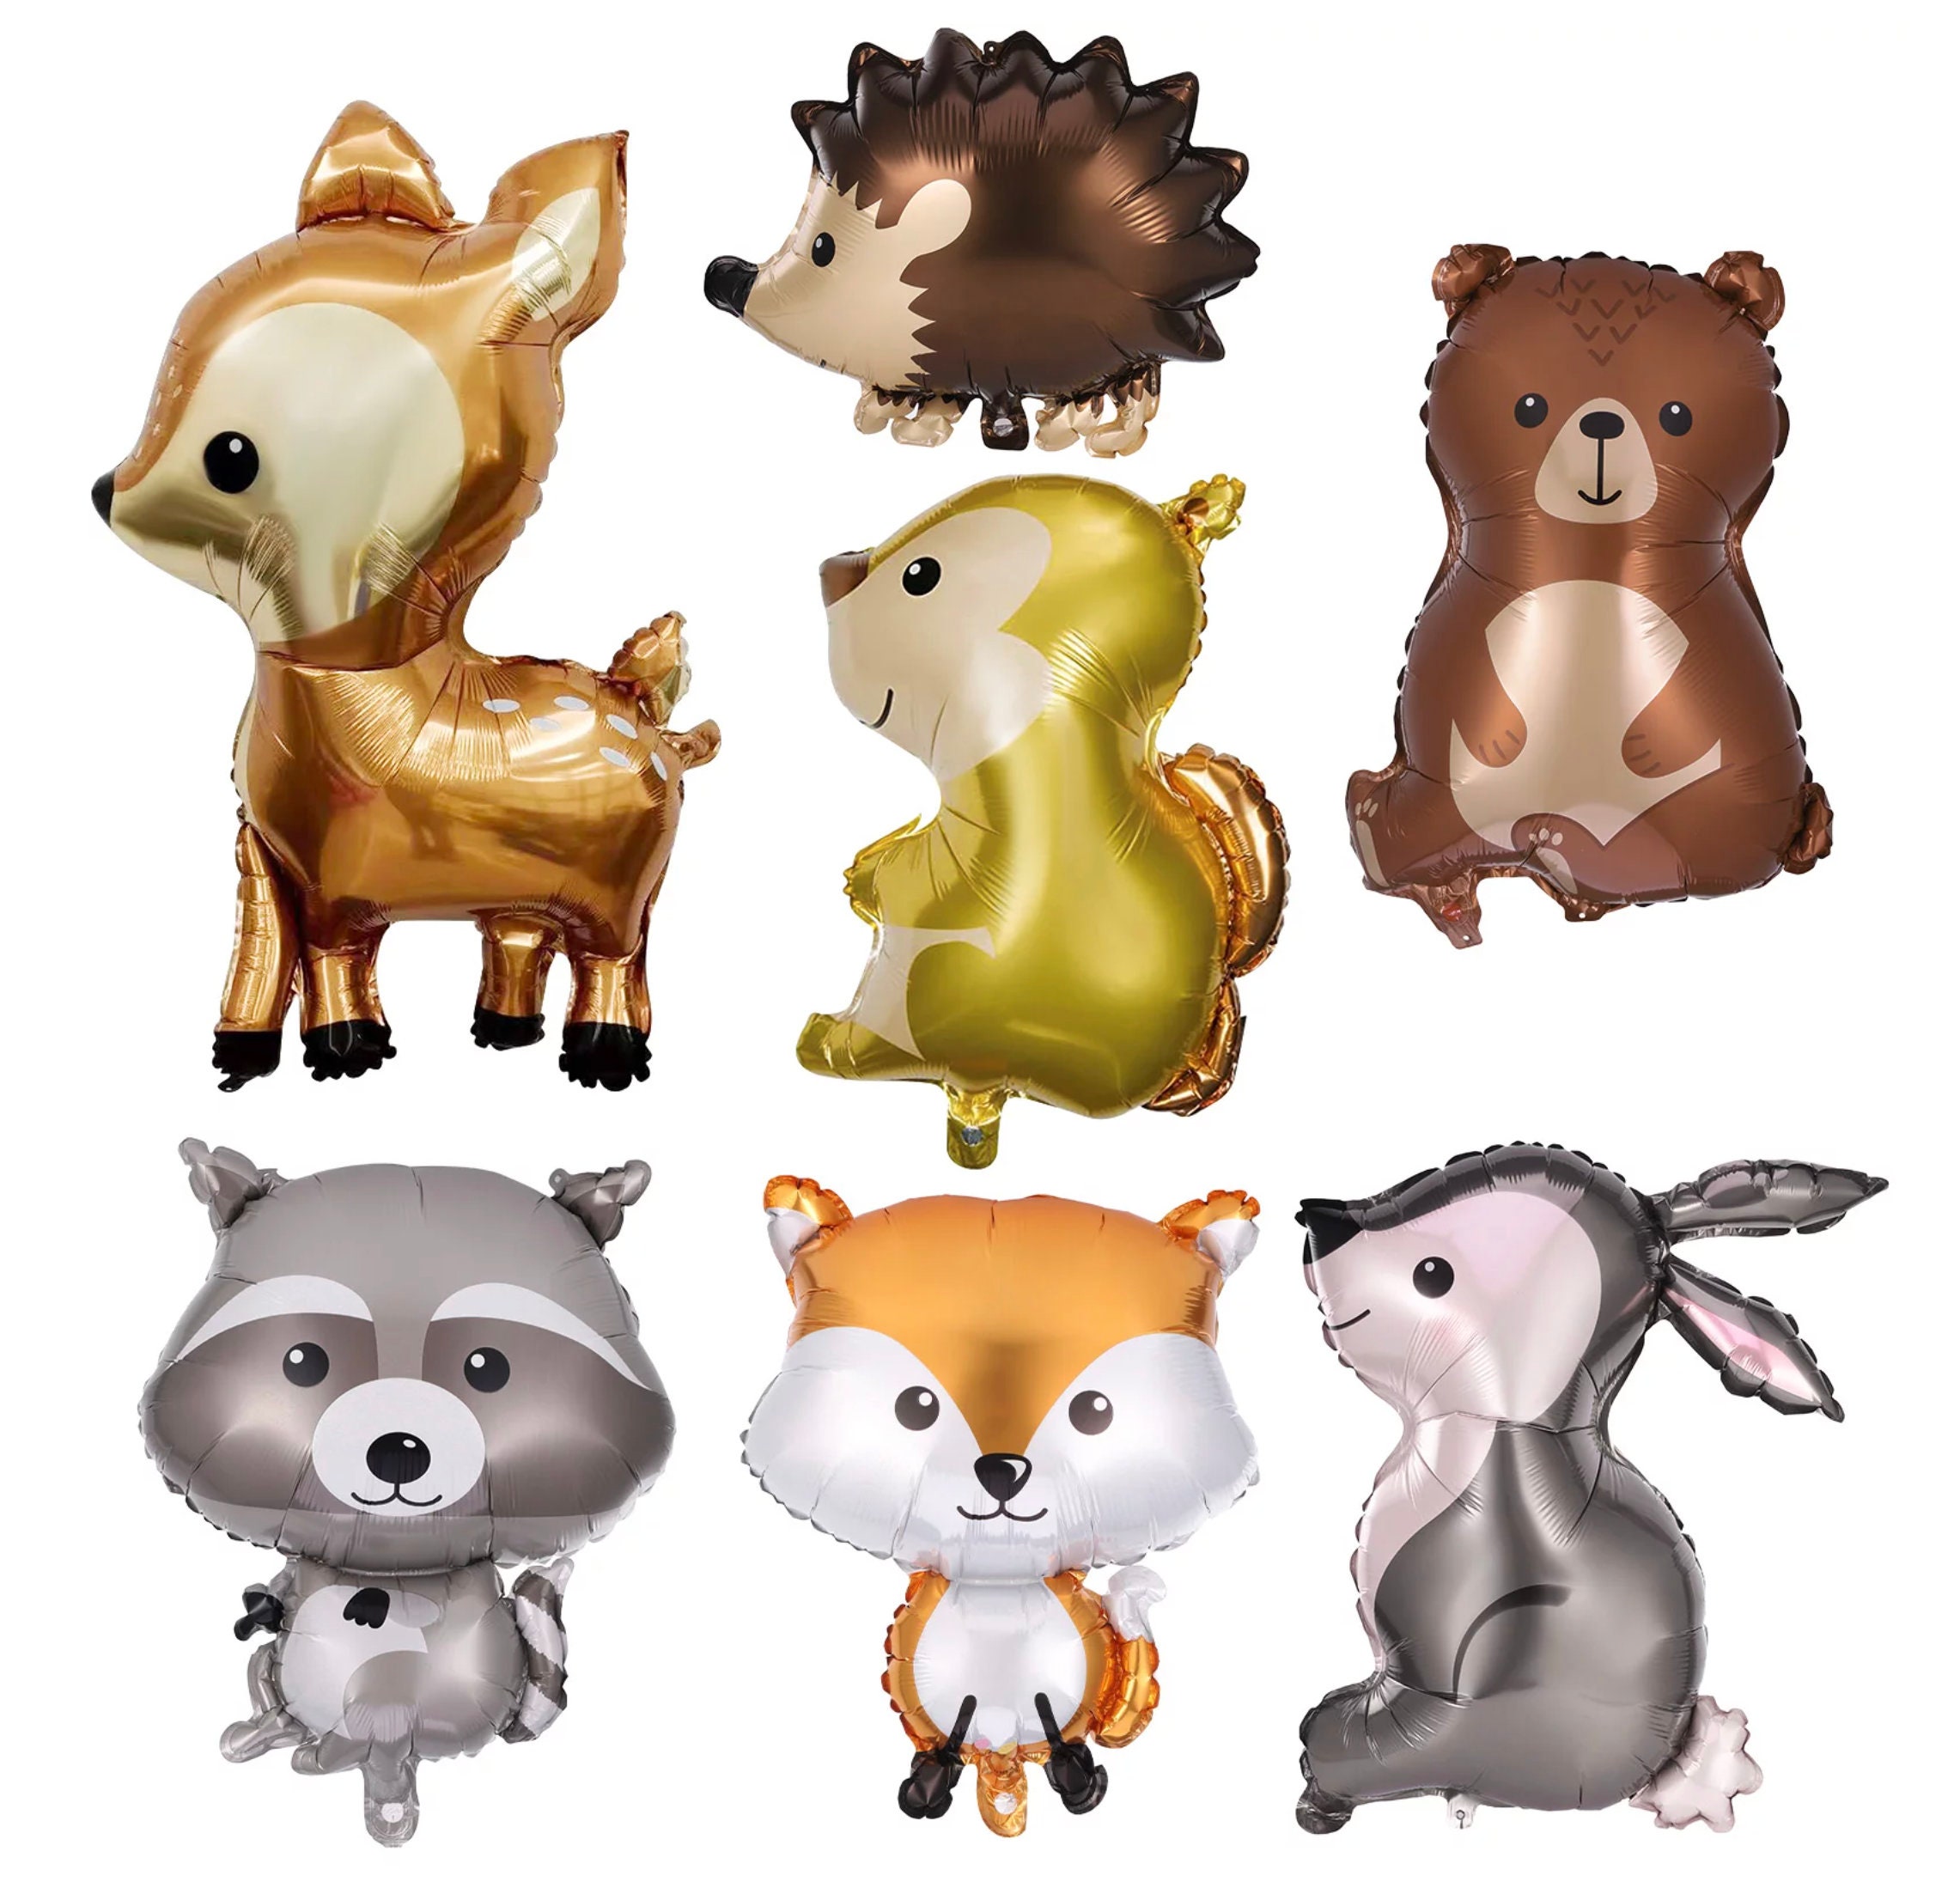 ns.productsocialmetatags:resources.openGraphTitle  Woodland animal gifts,  Happy birthday gifts, Birthday gift cards